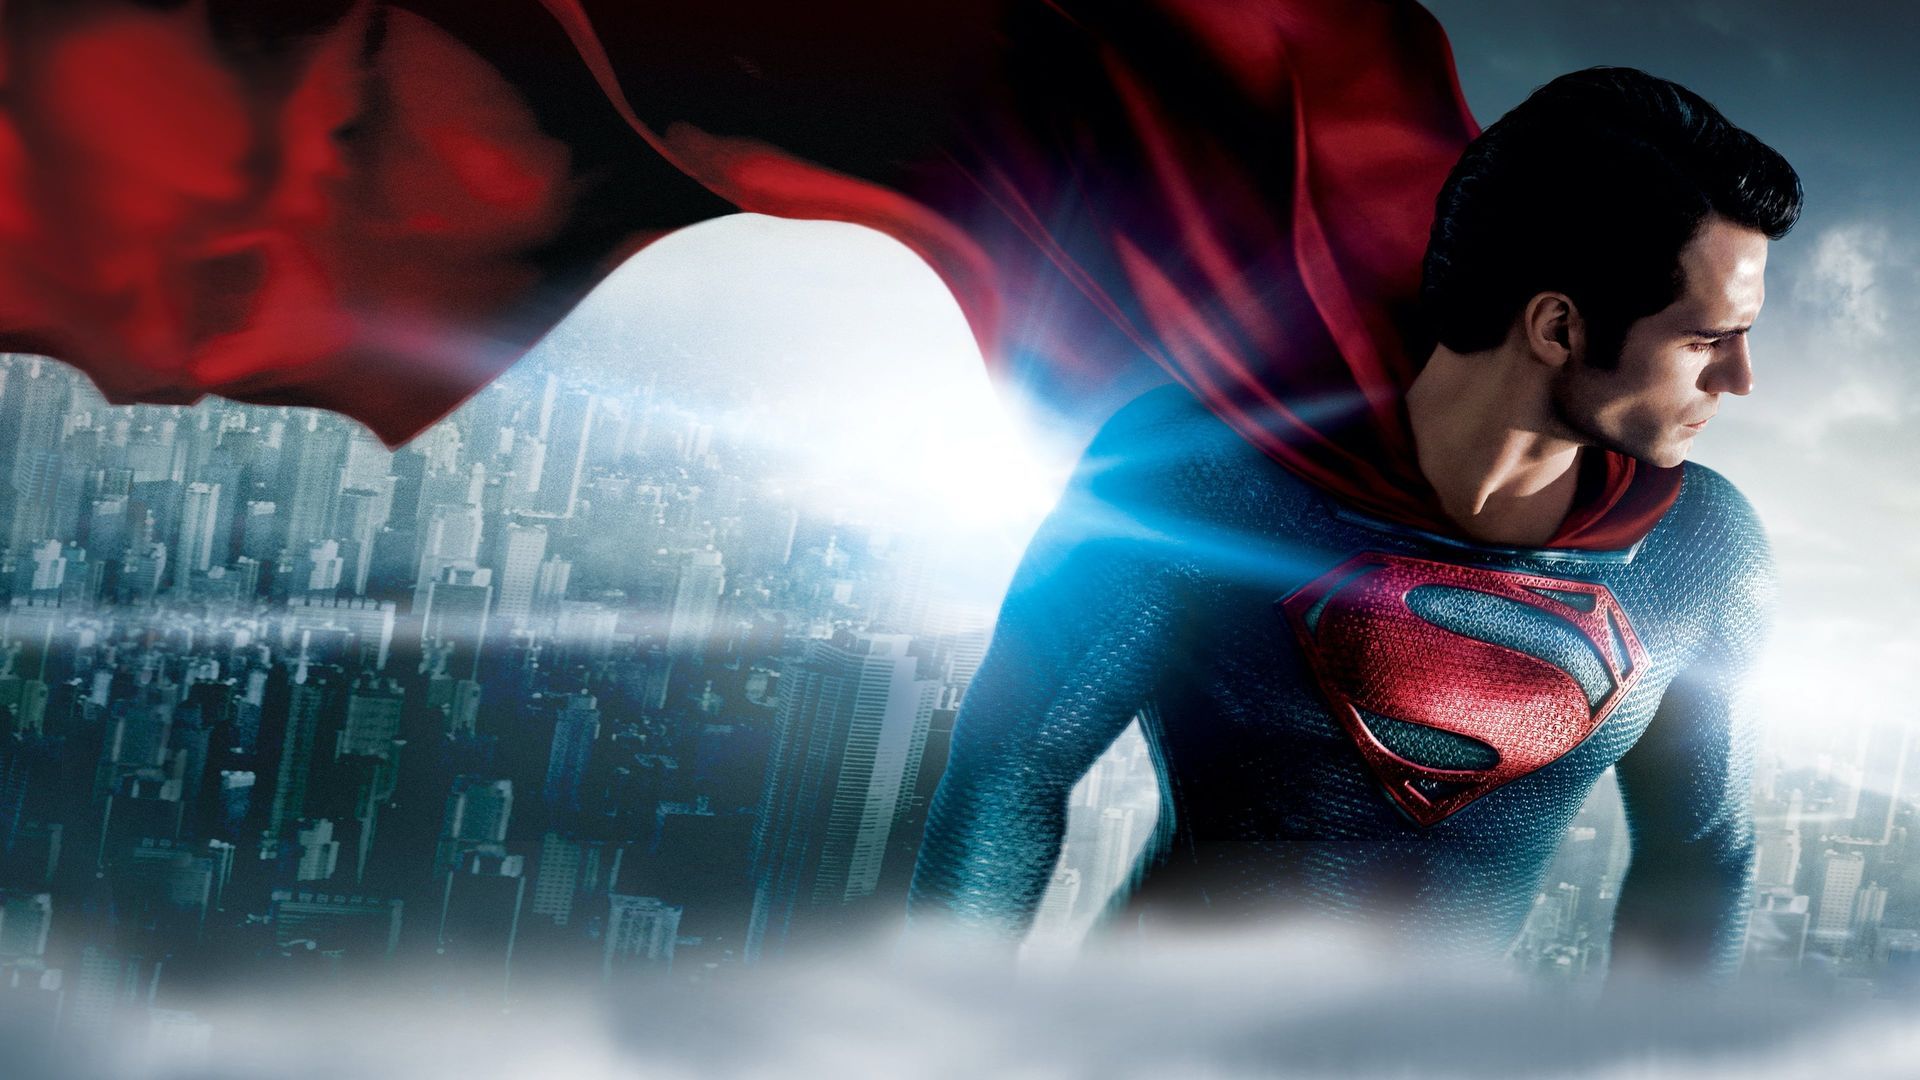 Movie Review - 'Man of Steel - Snyder's Superman, Between Two Worlds : NPR